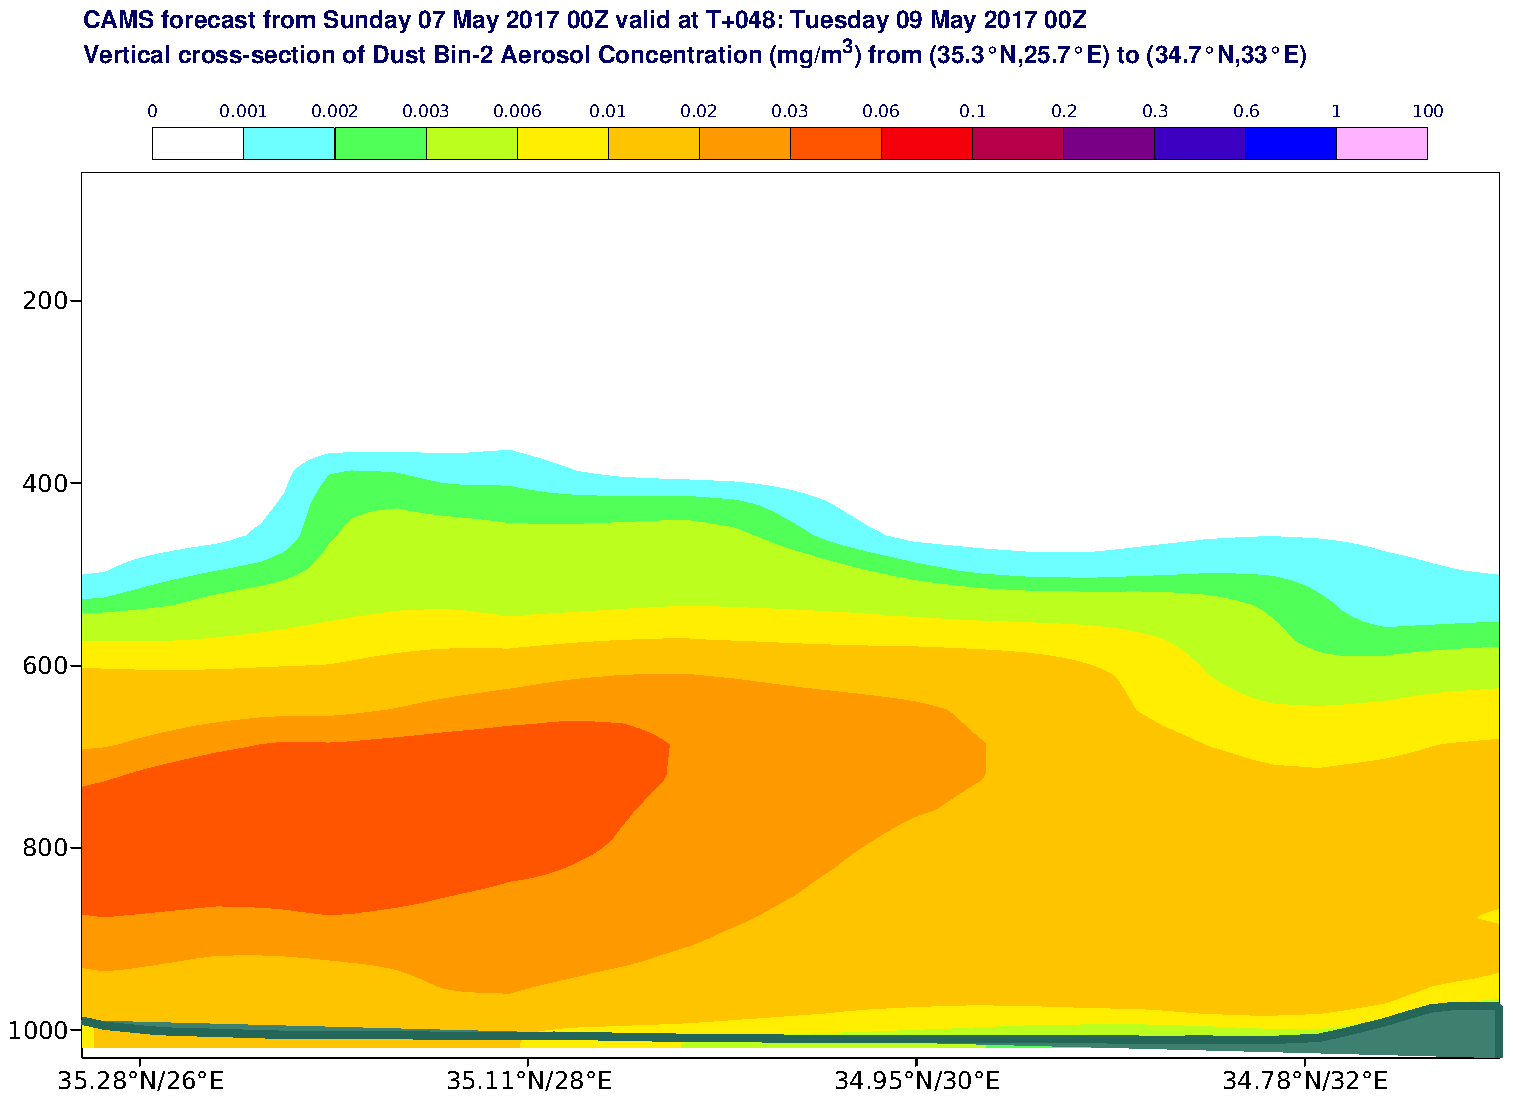 Vertical cross-section of Dust Bin-2 Aerosol Concentration (mg/m3) valid at T48 - 2017-05-09 00:00